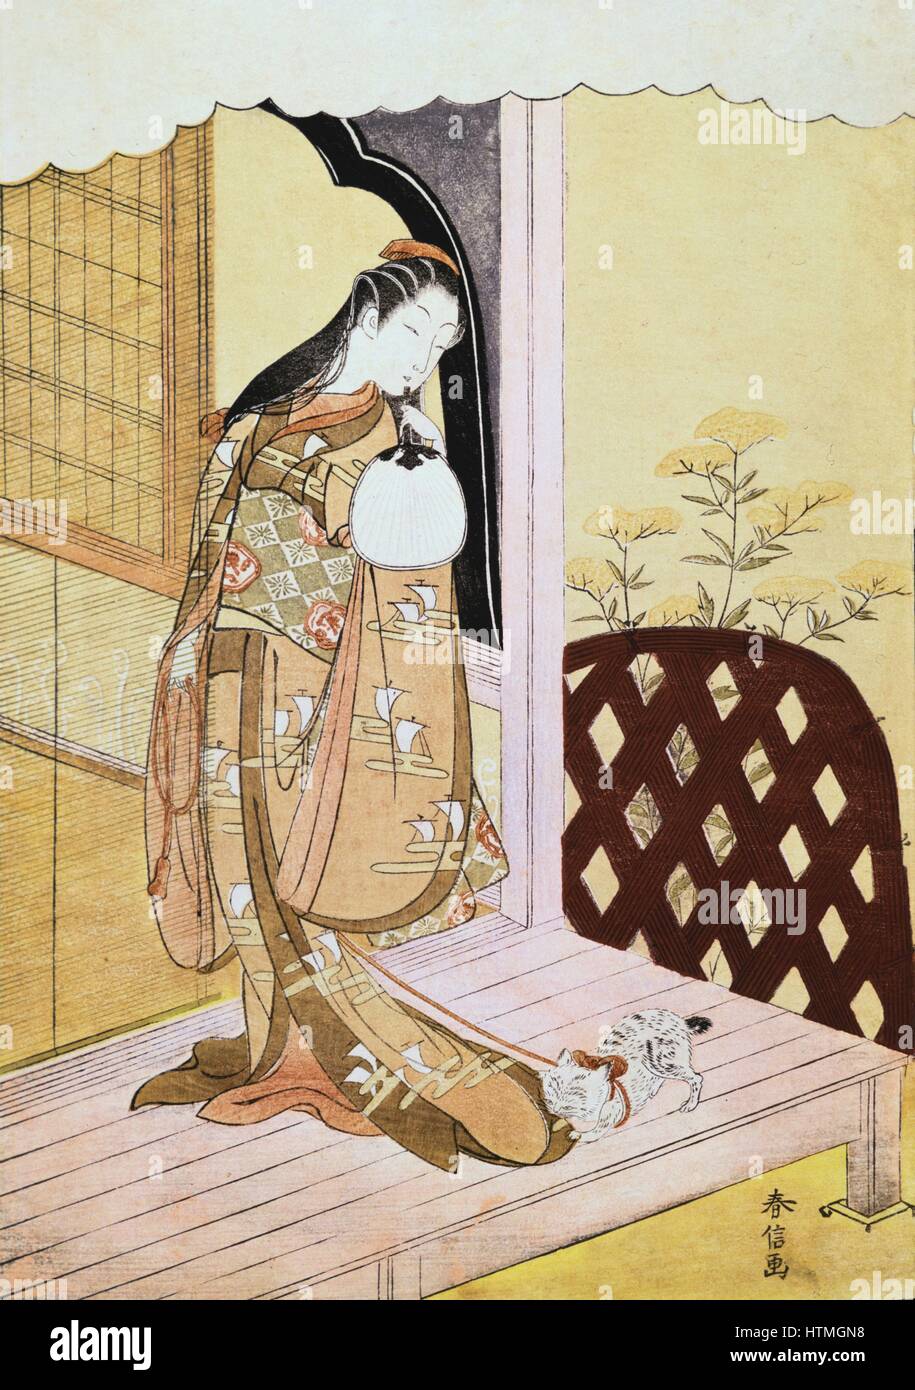 The Princess Nyosan', c1765. The princess looks down at the cat playing with the hem of her robe. In 'The Book of Genji', Eleventh century classic of Japanese literature, Nyosan is the second principal wife of Genji, son of the Japanese Emperor. Japanese Stock Photo